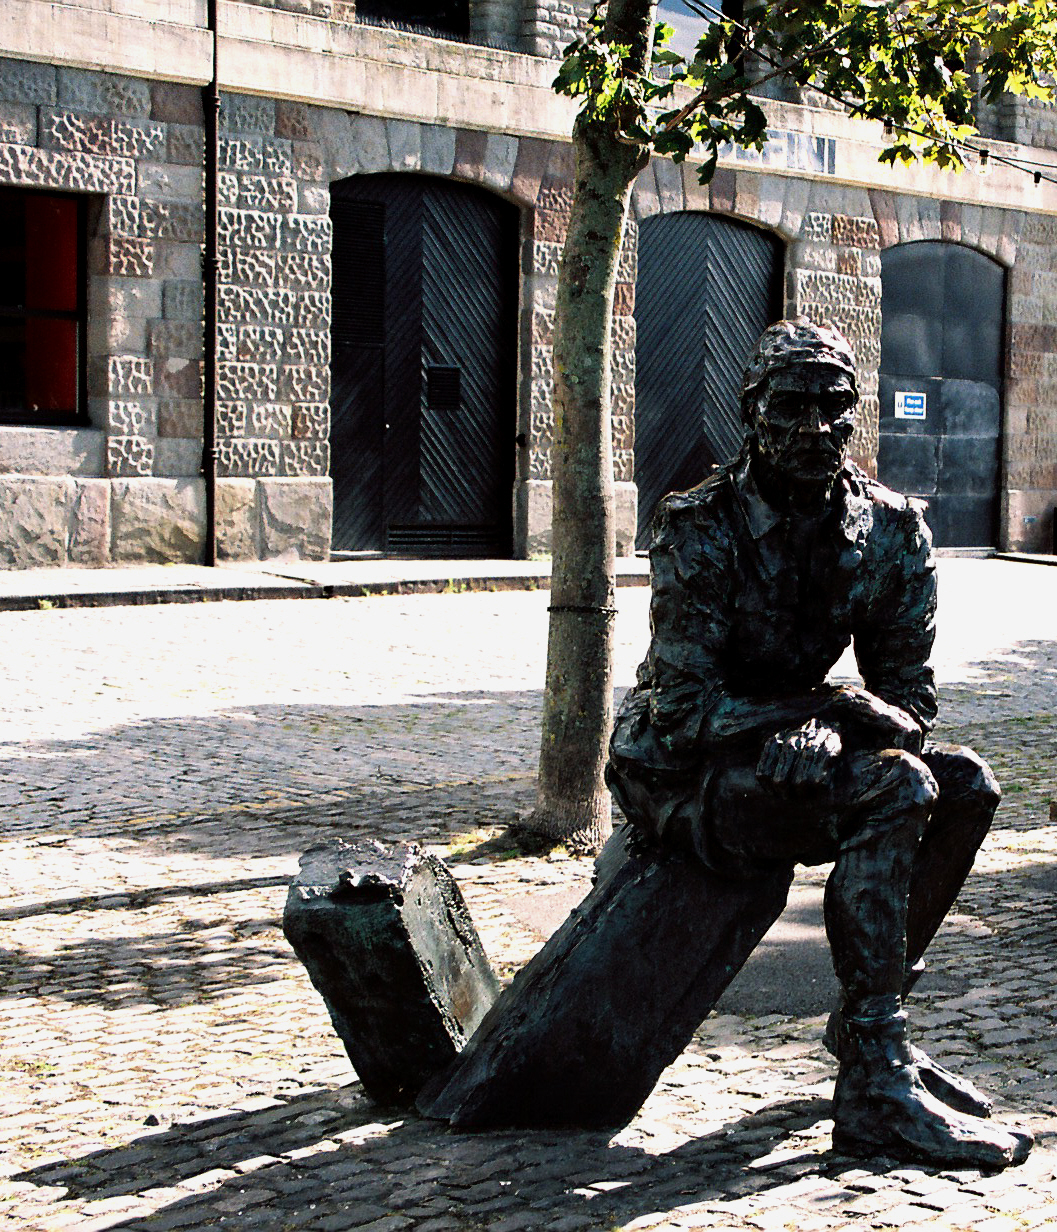 a bronze statue sitting on the ground near a tree